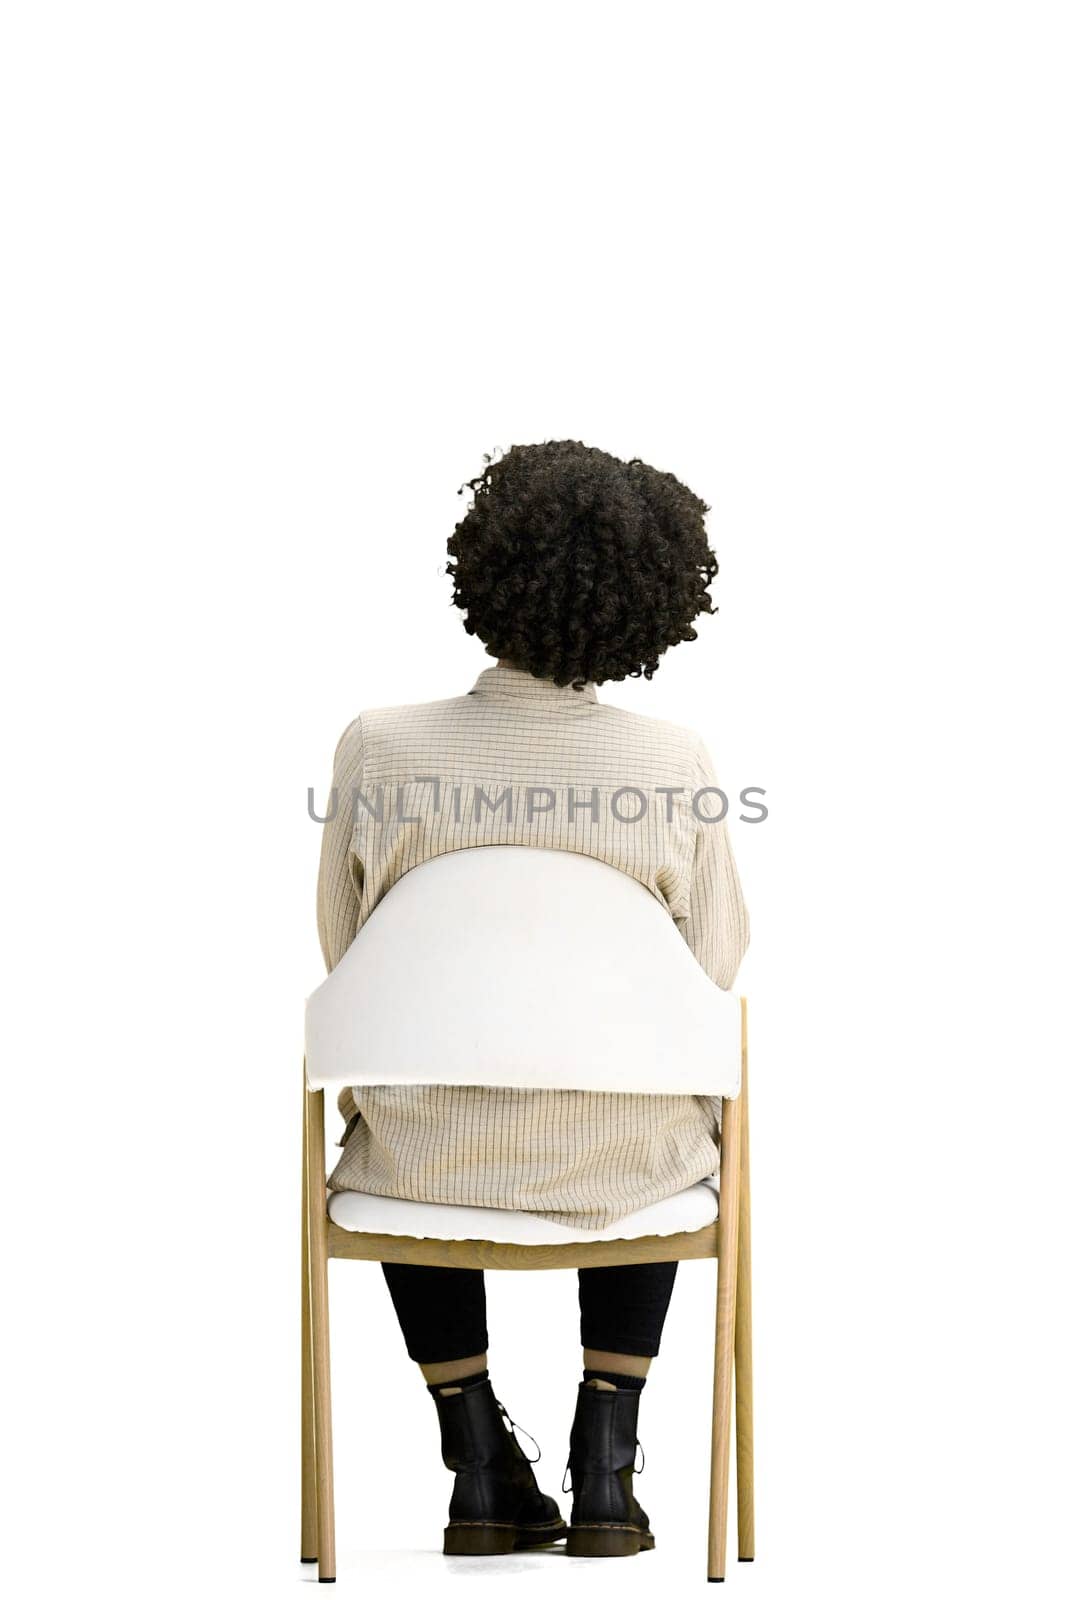 A woman, full-length, on a white background, sitting on a chair.